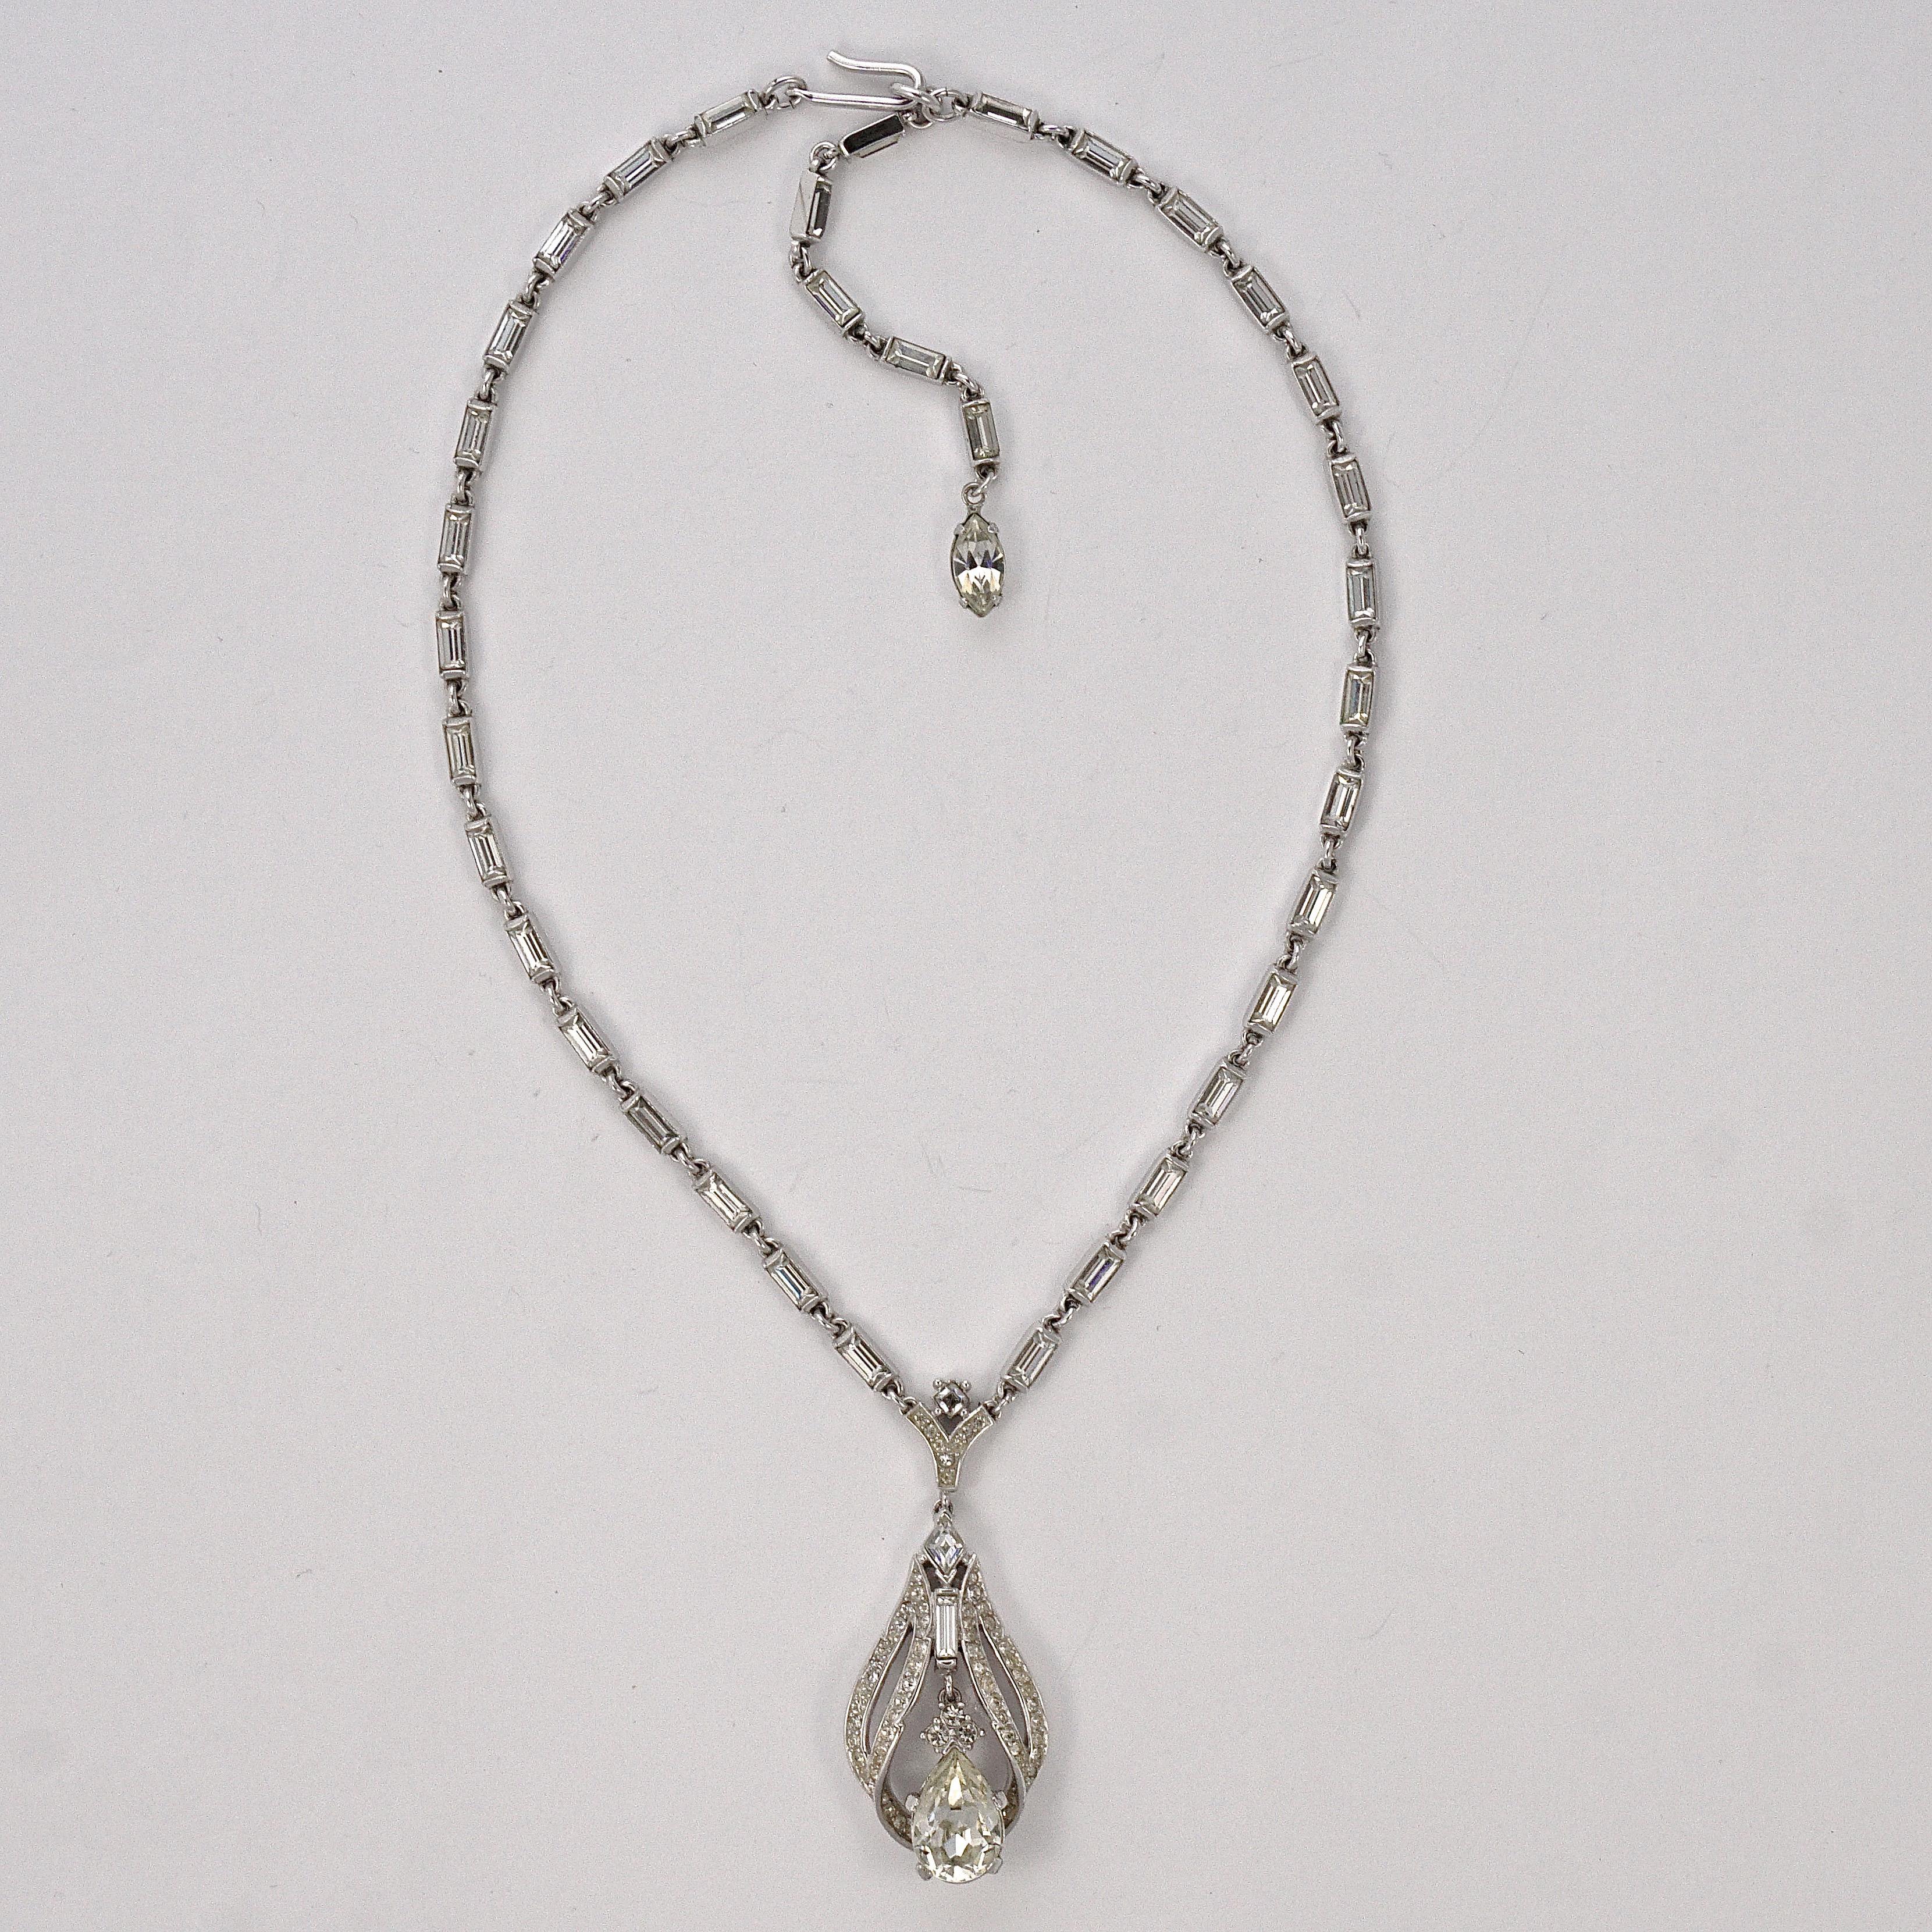 Fabulous Trifari silver tone necklace with rhinestone baguettes, and featuring a rhinestone pendant with a teardrop tremblant. The necklace measures length 39.4cm / 15.5 inches, and can be worn at a shorter length by adjusting the hook. The